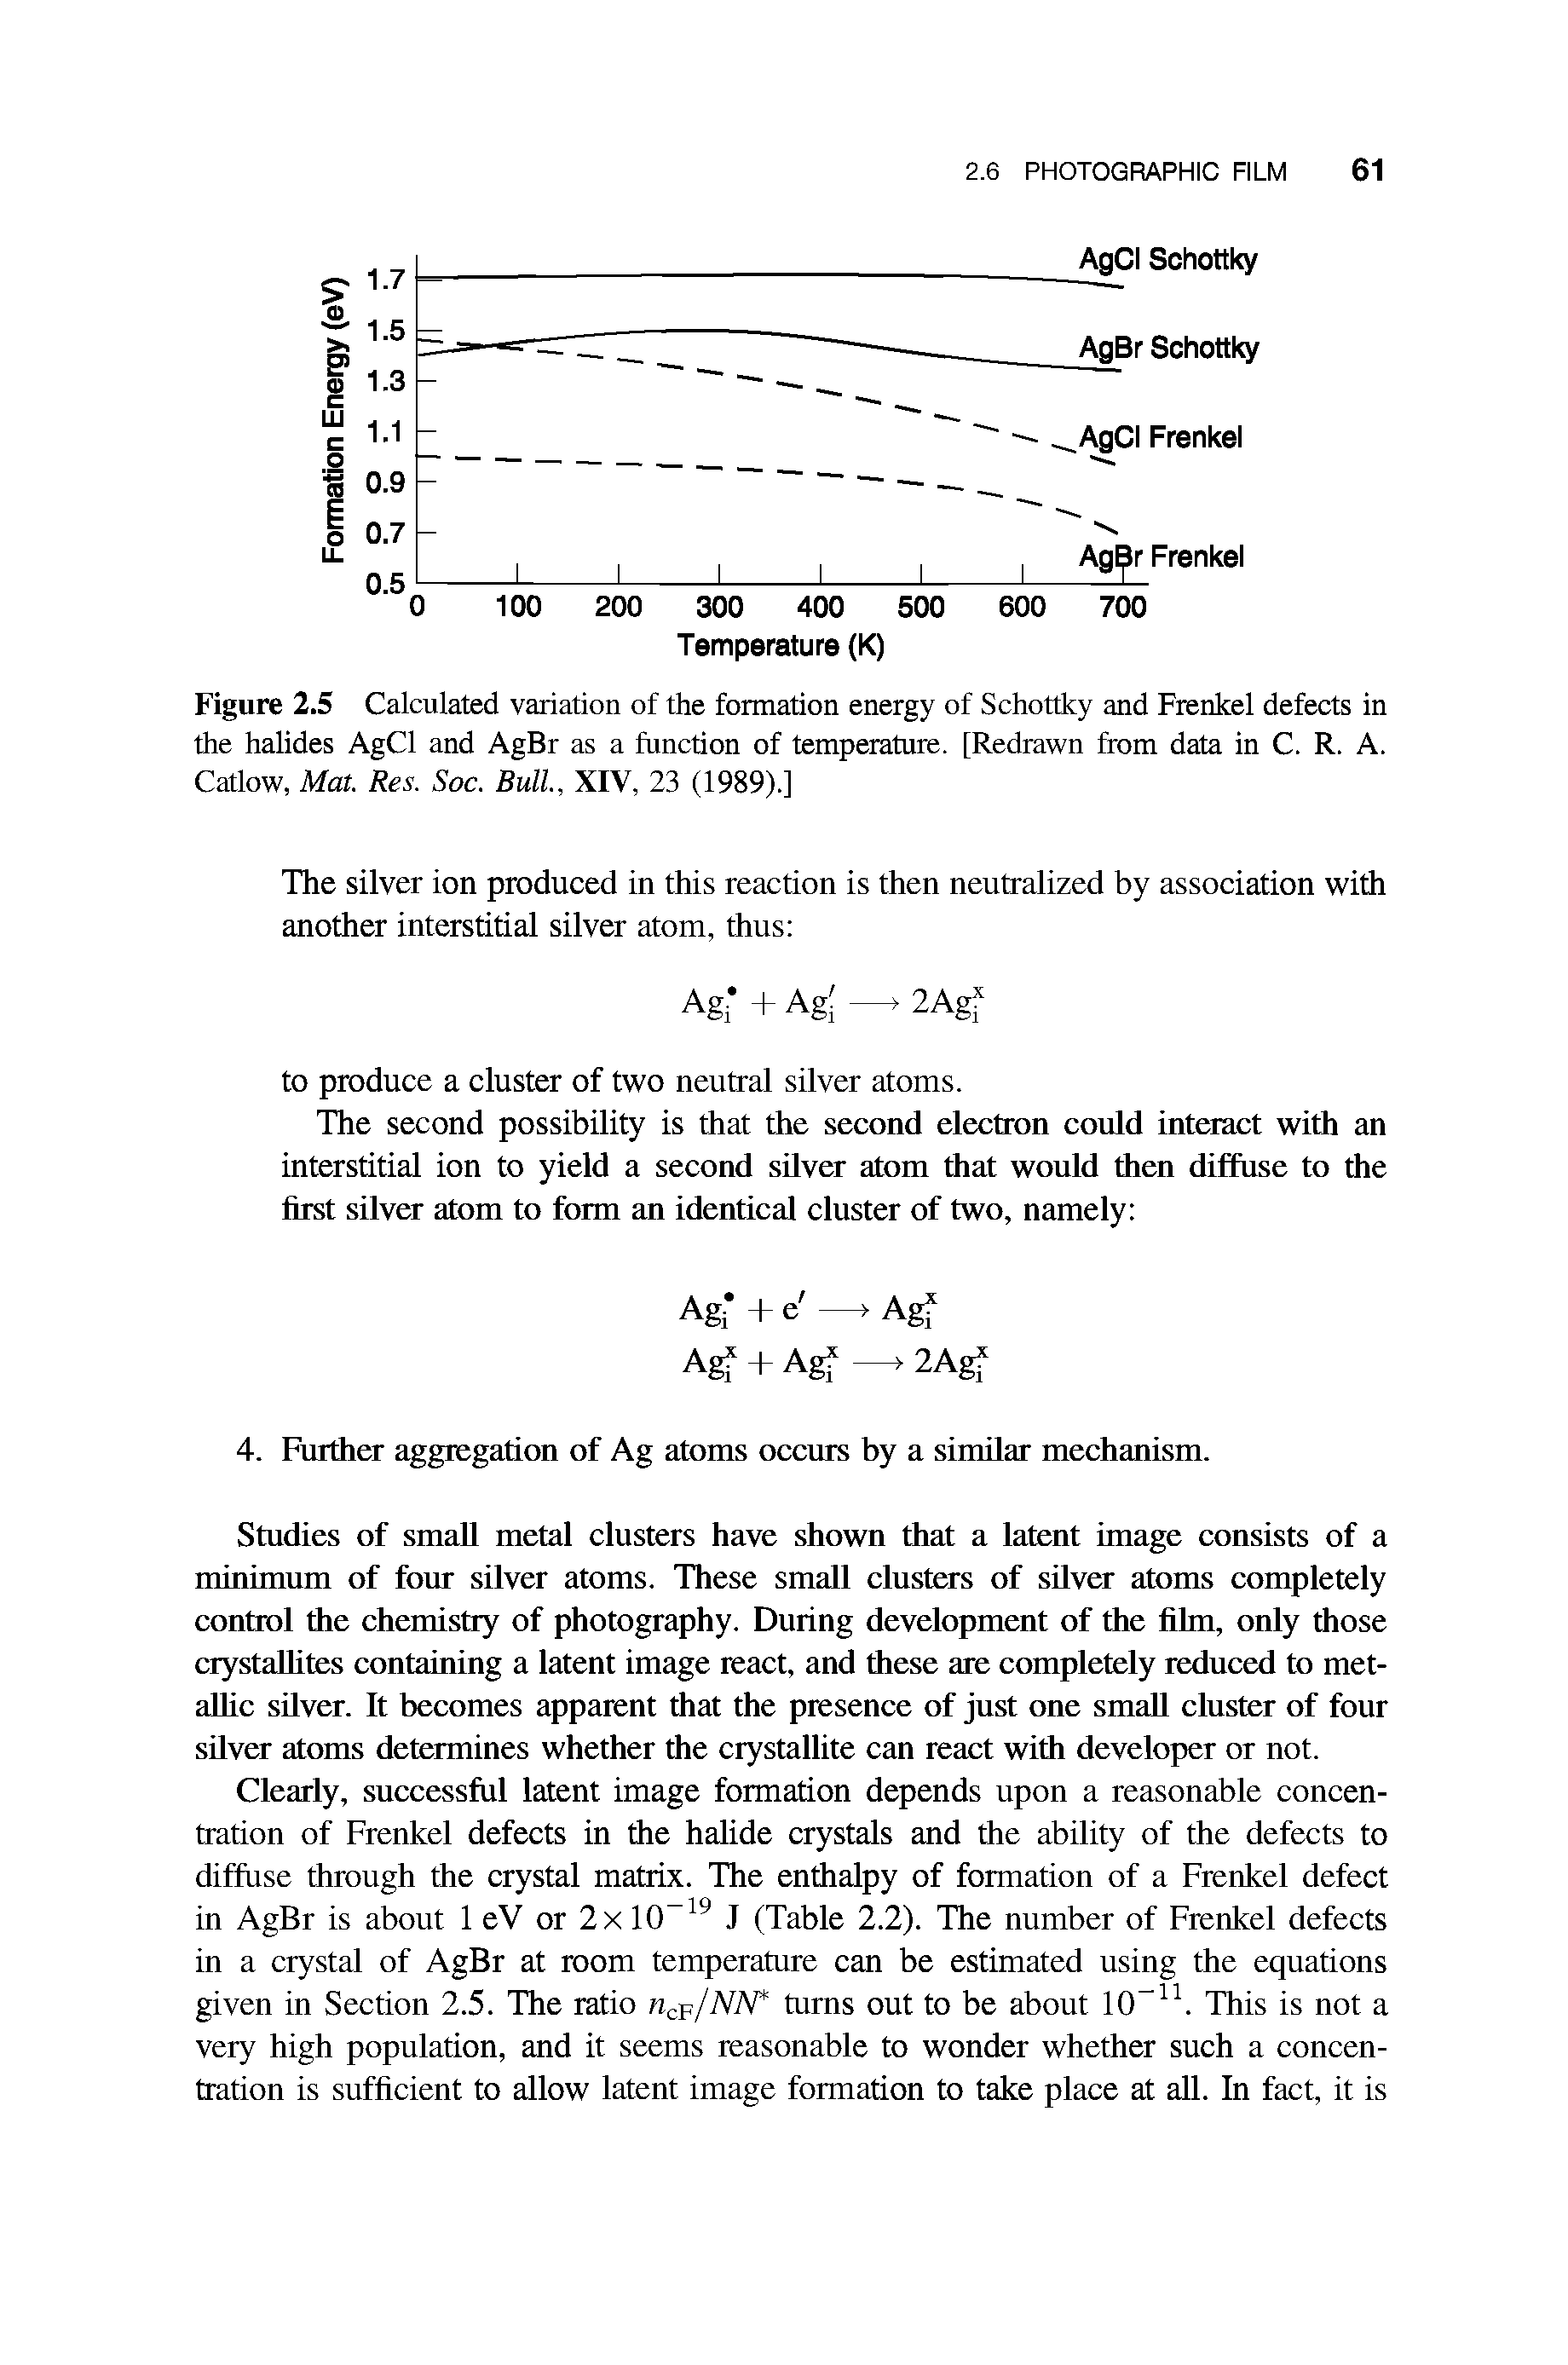 Figure 2.5 Calculated variation of the formation energy of Schottky and Frenkel defects in the halides AgCl and AgBr as a function of temperature. [Redrawn from data in C. R. A. Catlow, Mat. Res. Soc. Bull., XIV, 23 (1989).]...